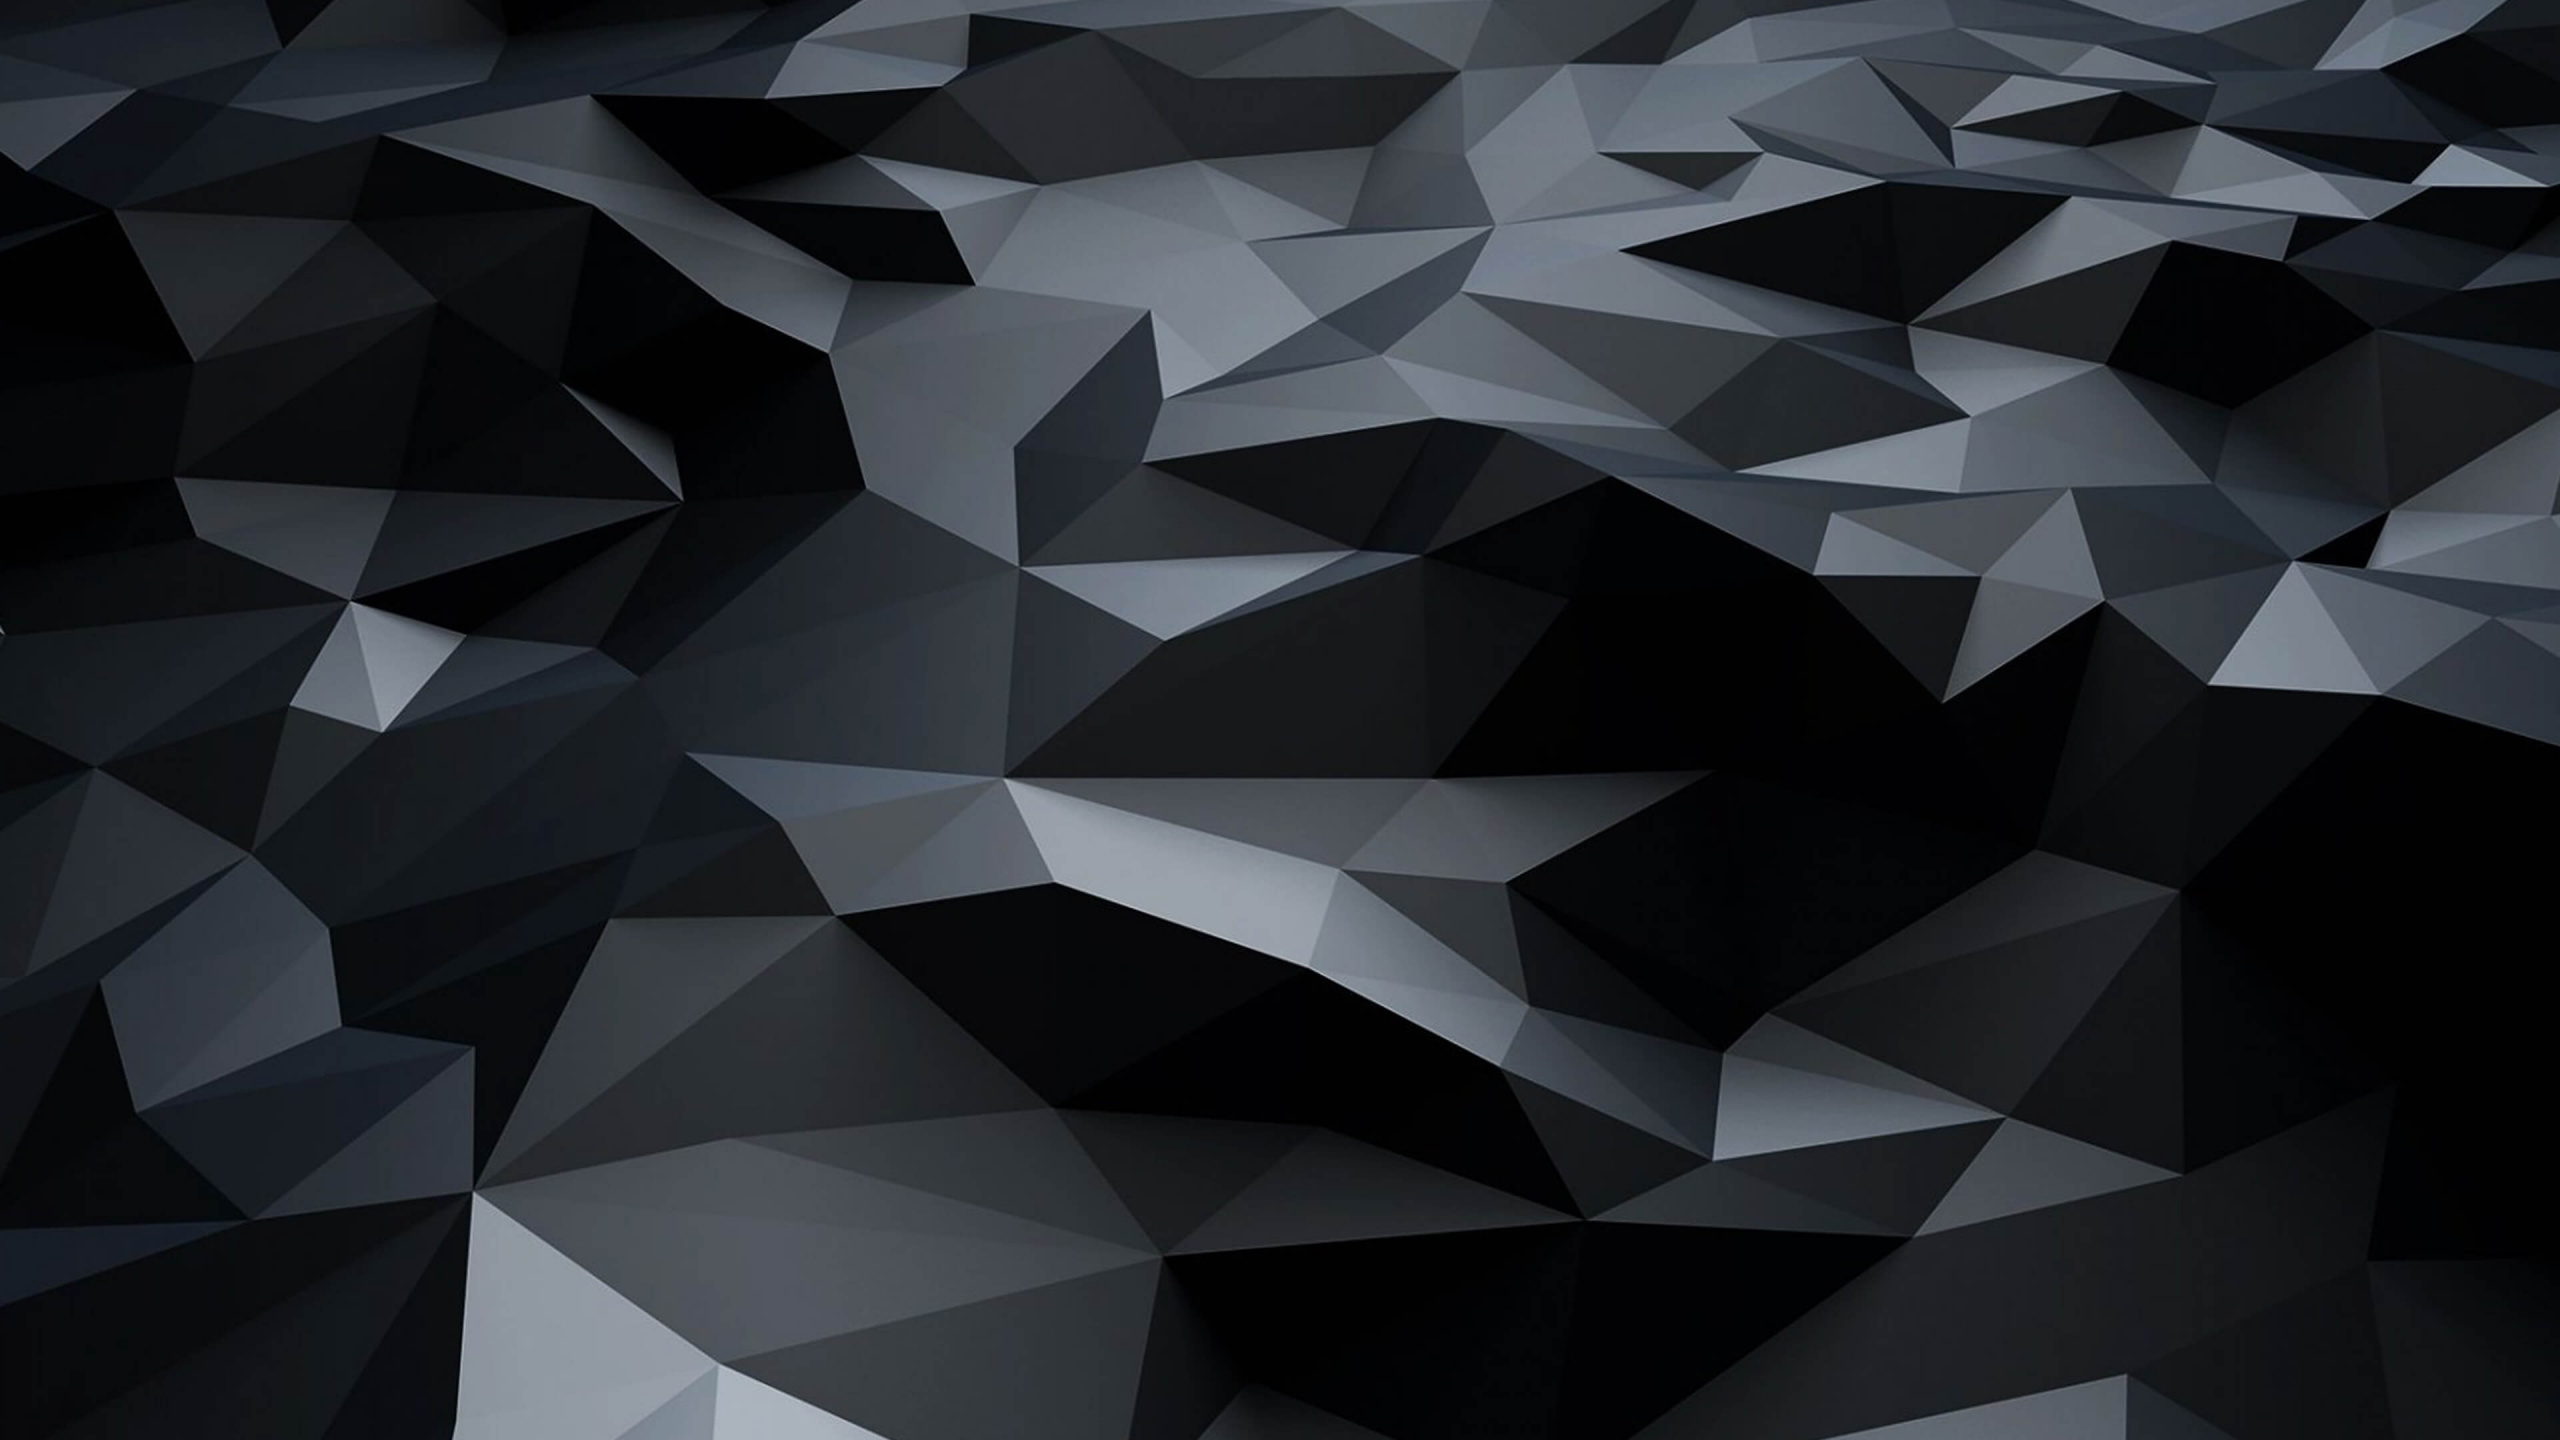 Black and White Abstract Art. Wallpaper in 2560x1440 Resolution